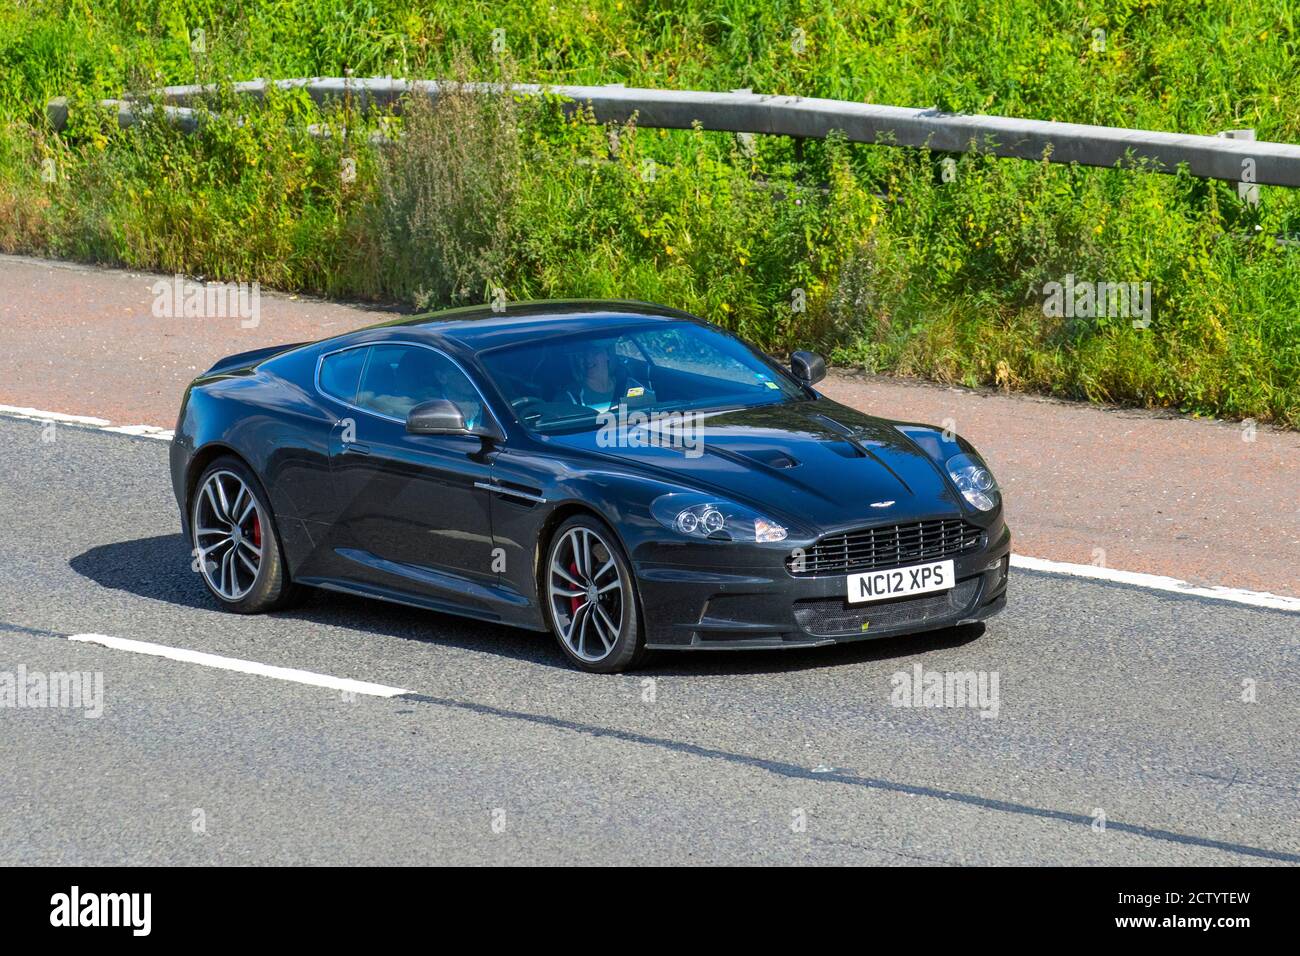 2012 5935cc black Aston Martin DBS V12 Superleggera Touchtronic 5.2 Automatic 2 door Coupe; Vehicular traffic moving vehicles, supercars, vehicle driving on UK roads, motors, motoring on the M6 motorway highway road network. Stock Photo